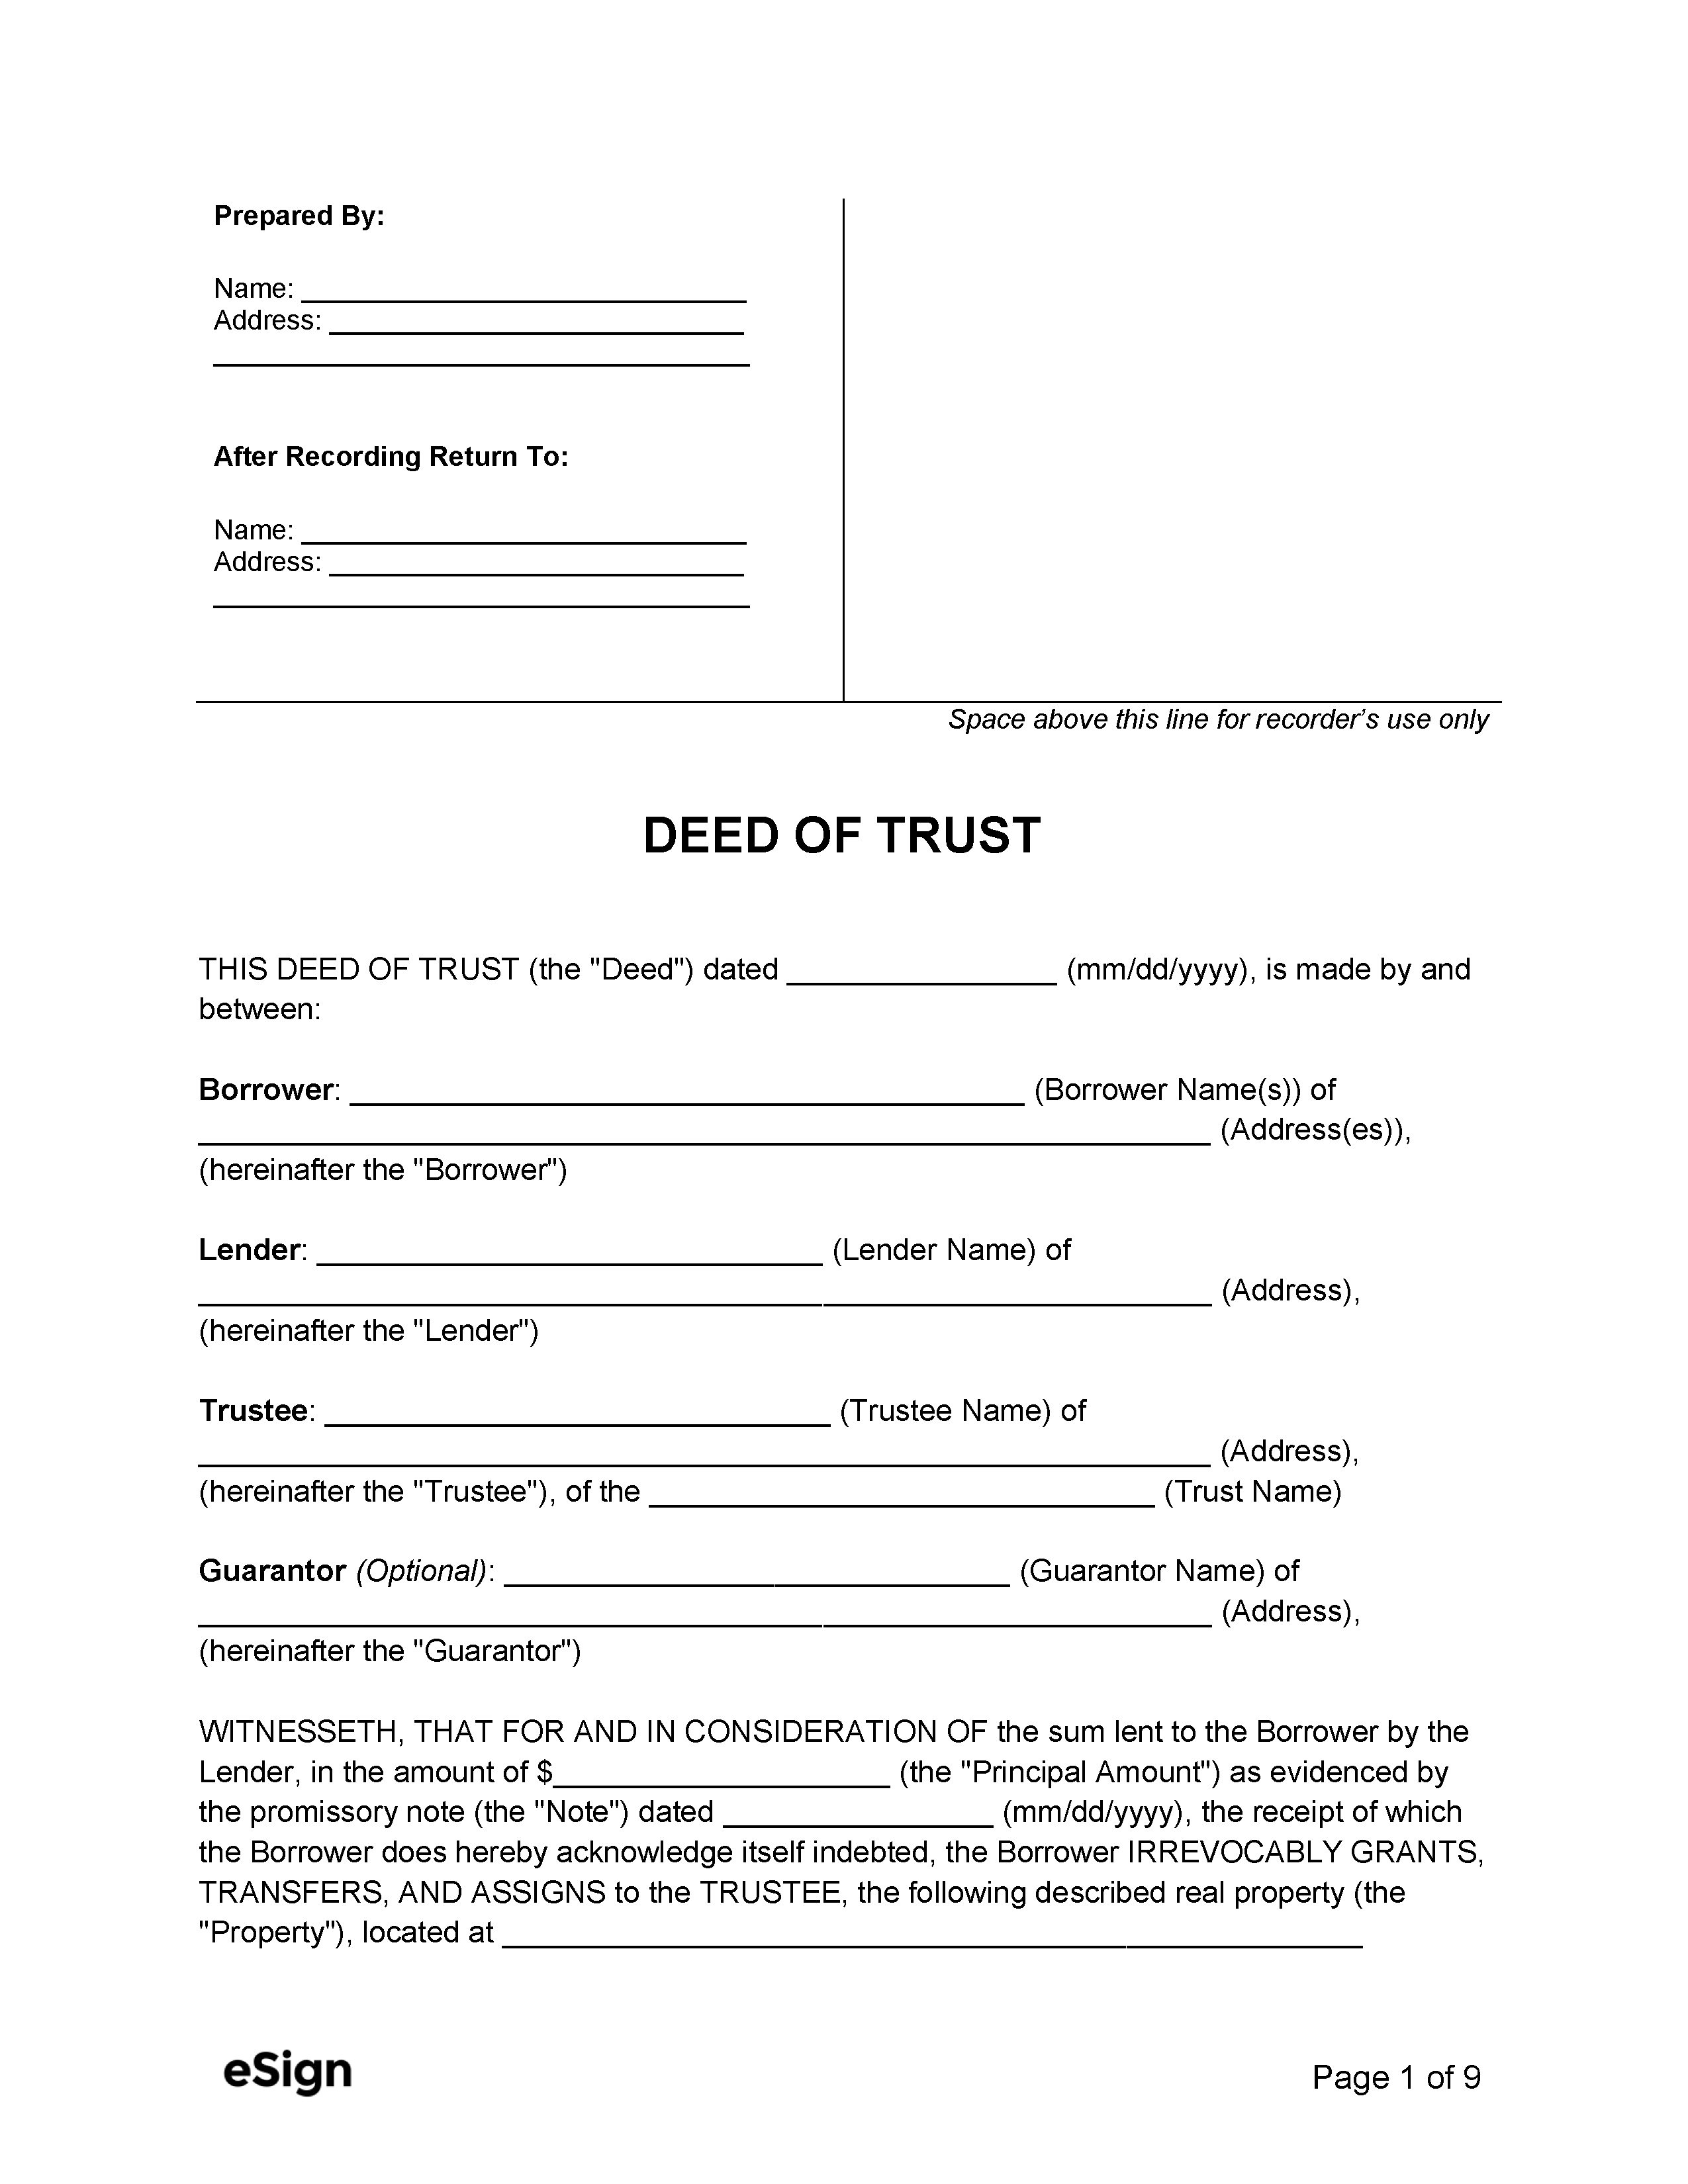 assignment of deed of trust meaning